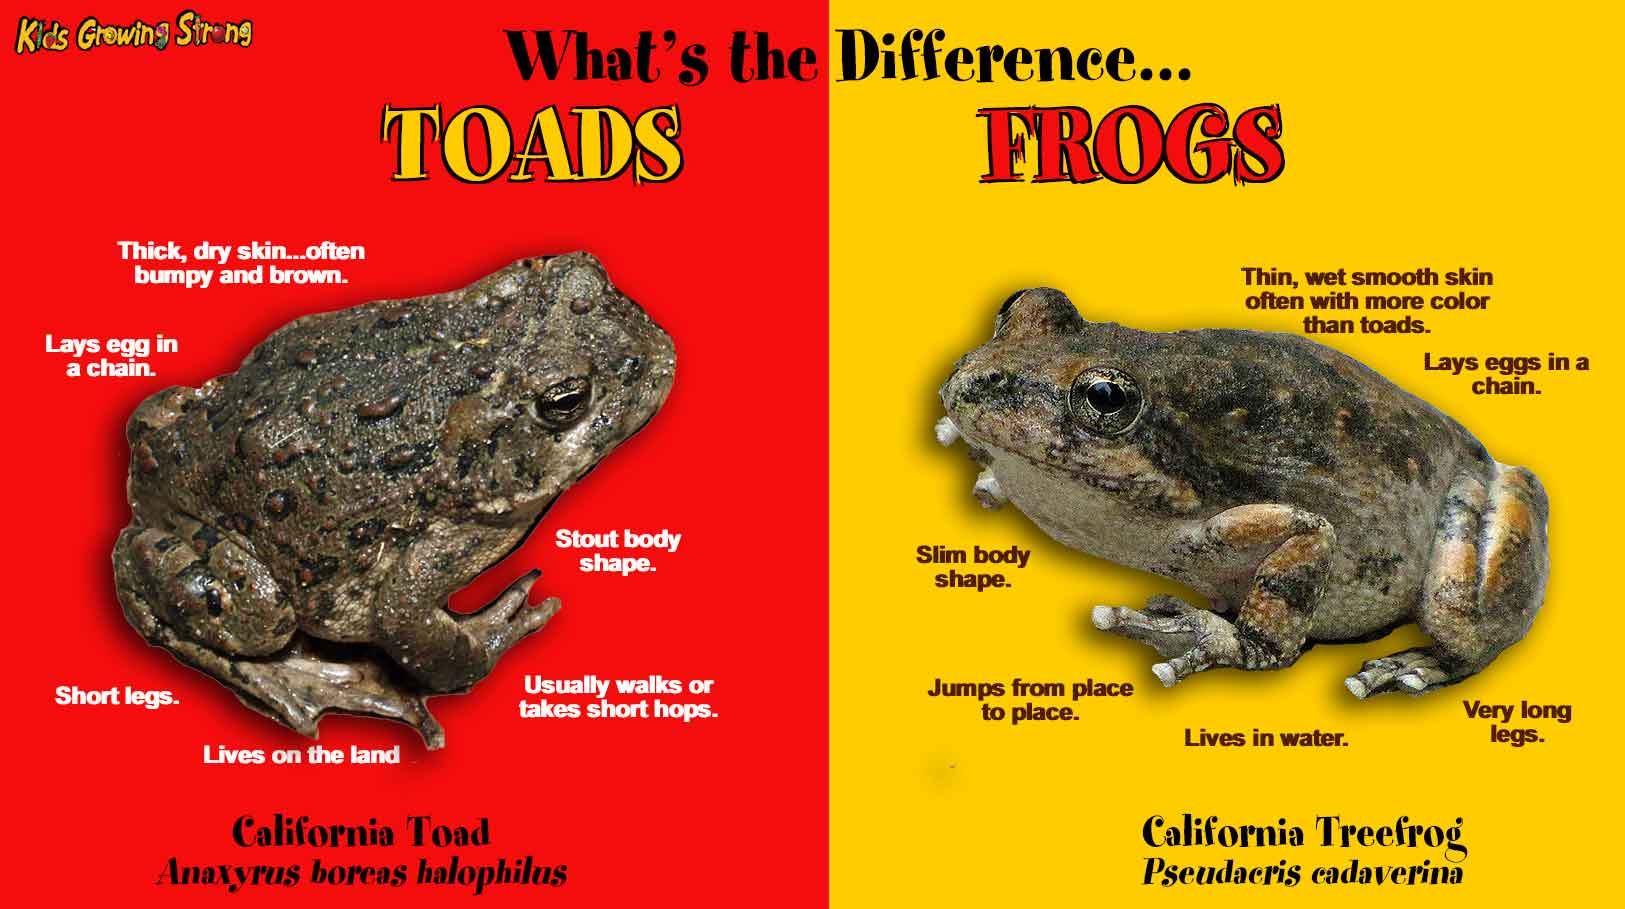 Toads – Kids Growing Strong